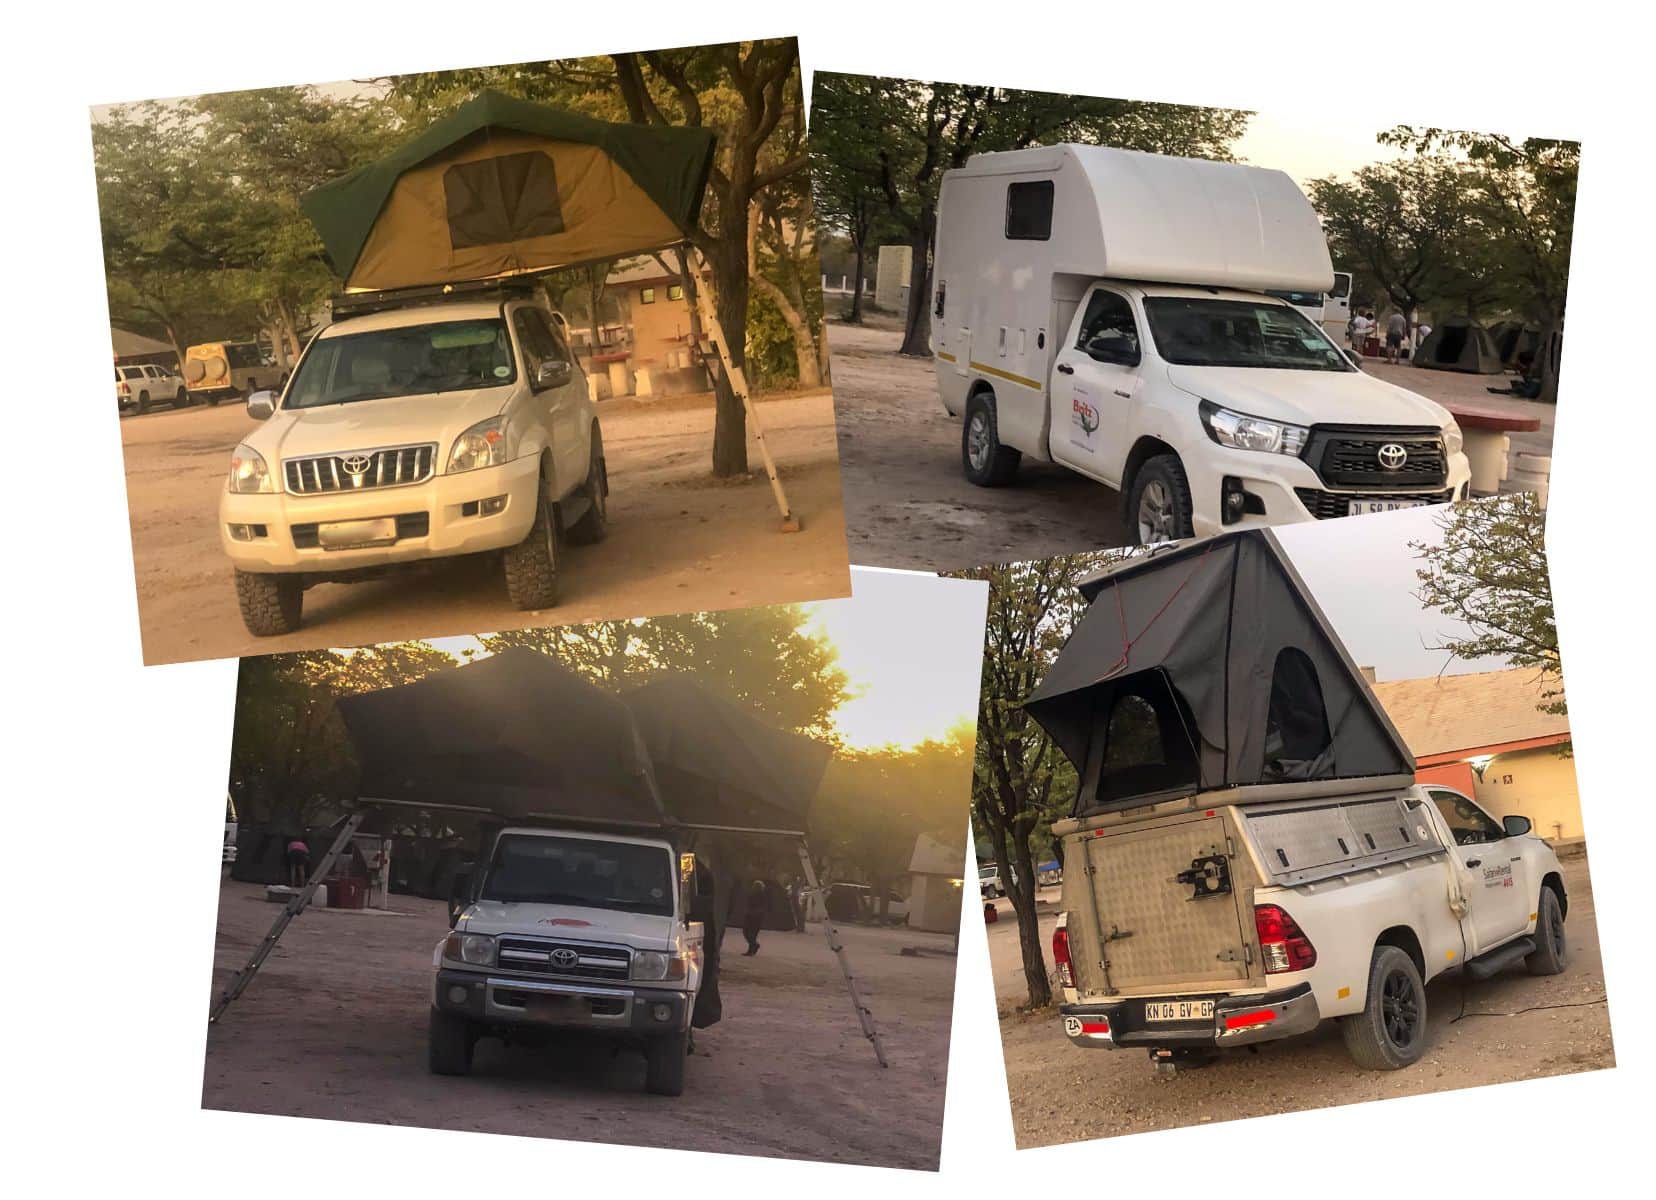 Overlanding botswana tips - 4 different types of 4x4 with tent and internal accommodation options 